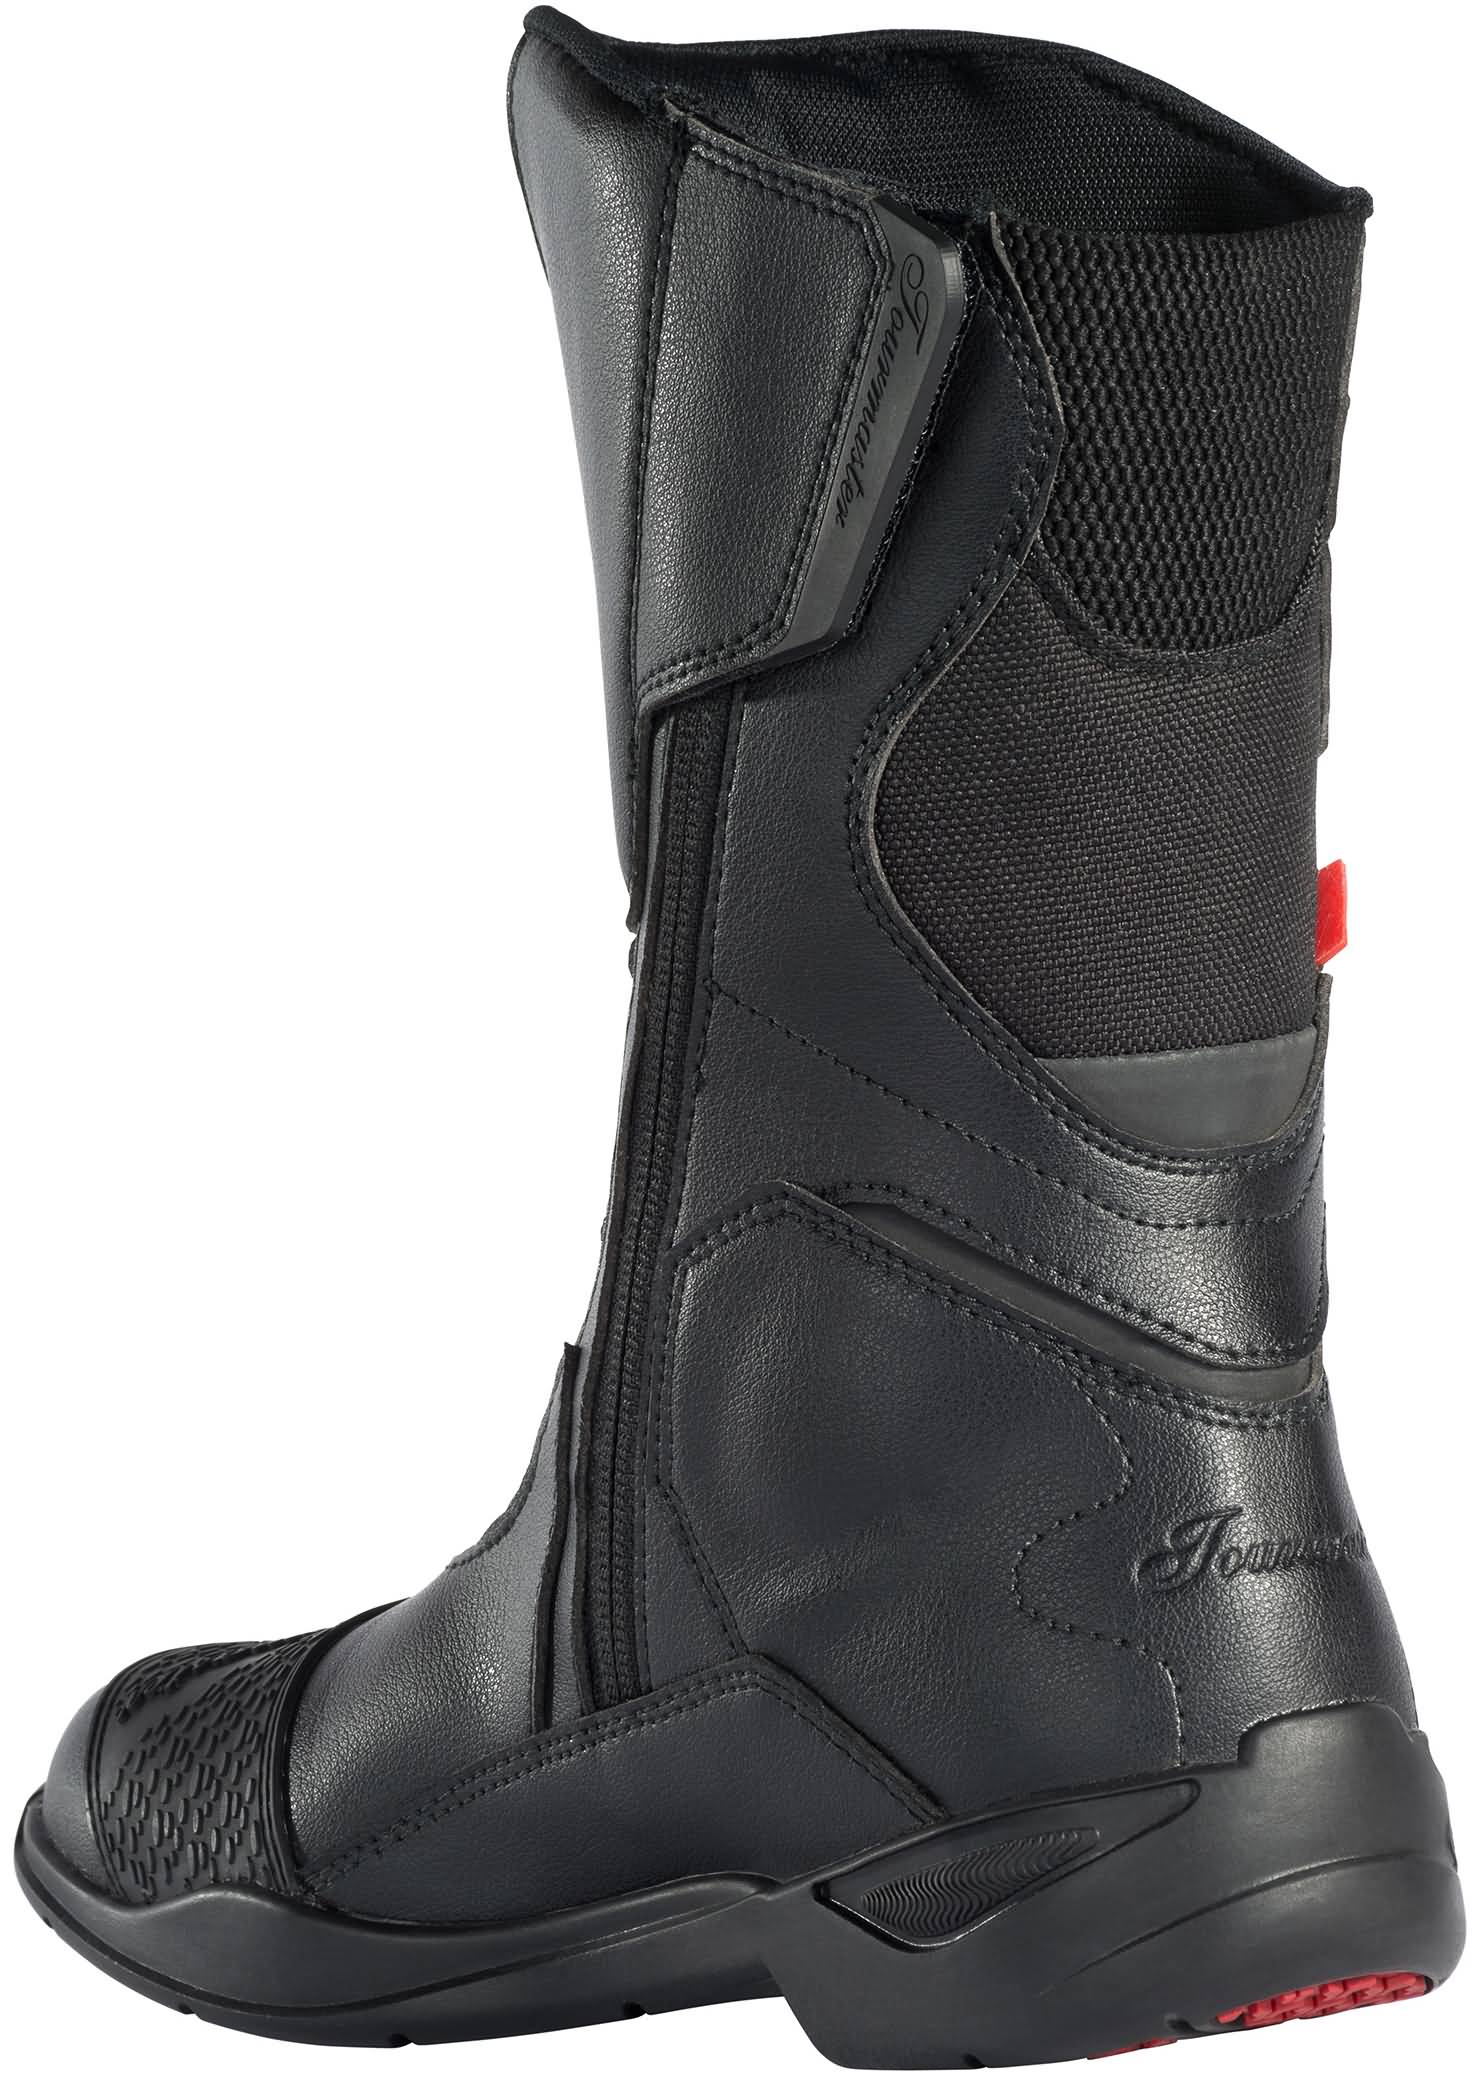 Tour Master Cafe Racer Series Motorcycle Apparel & Footwear Review